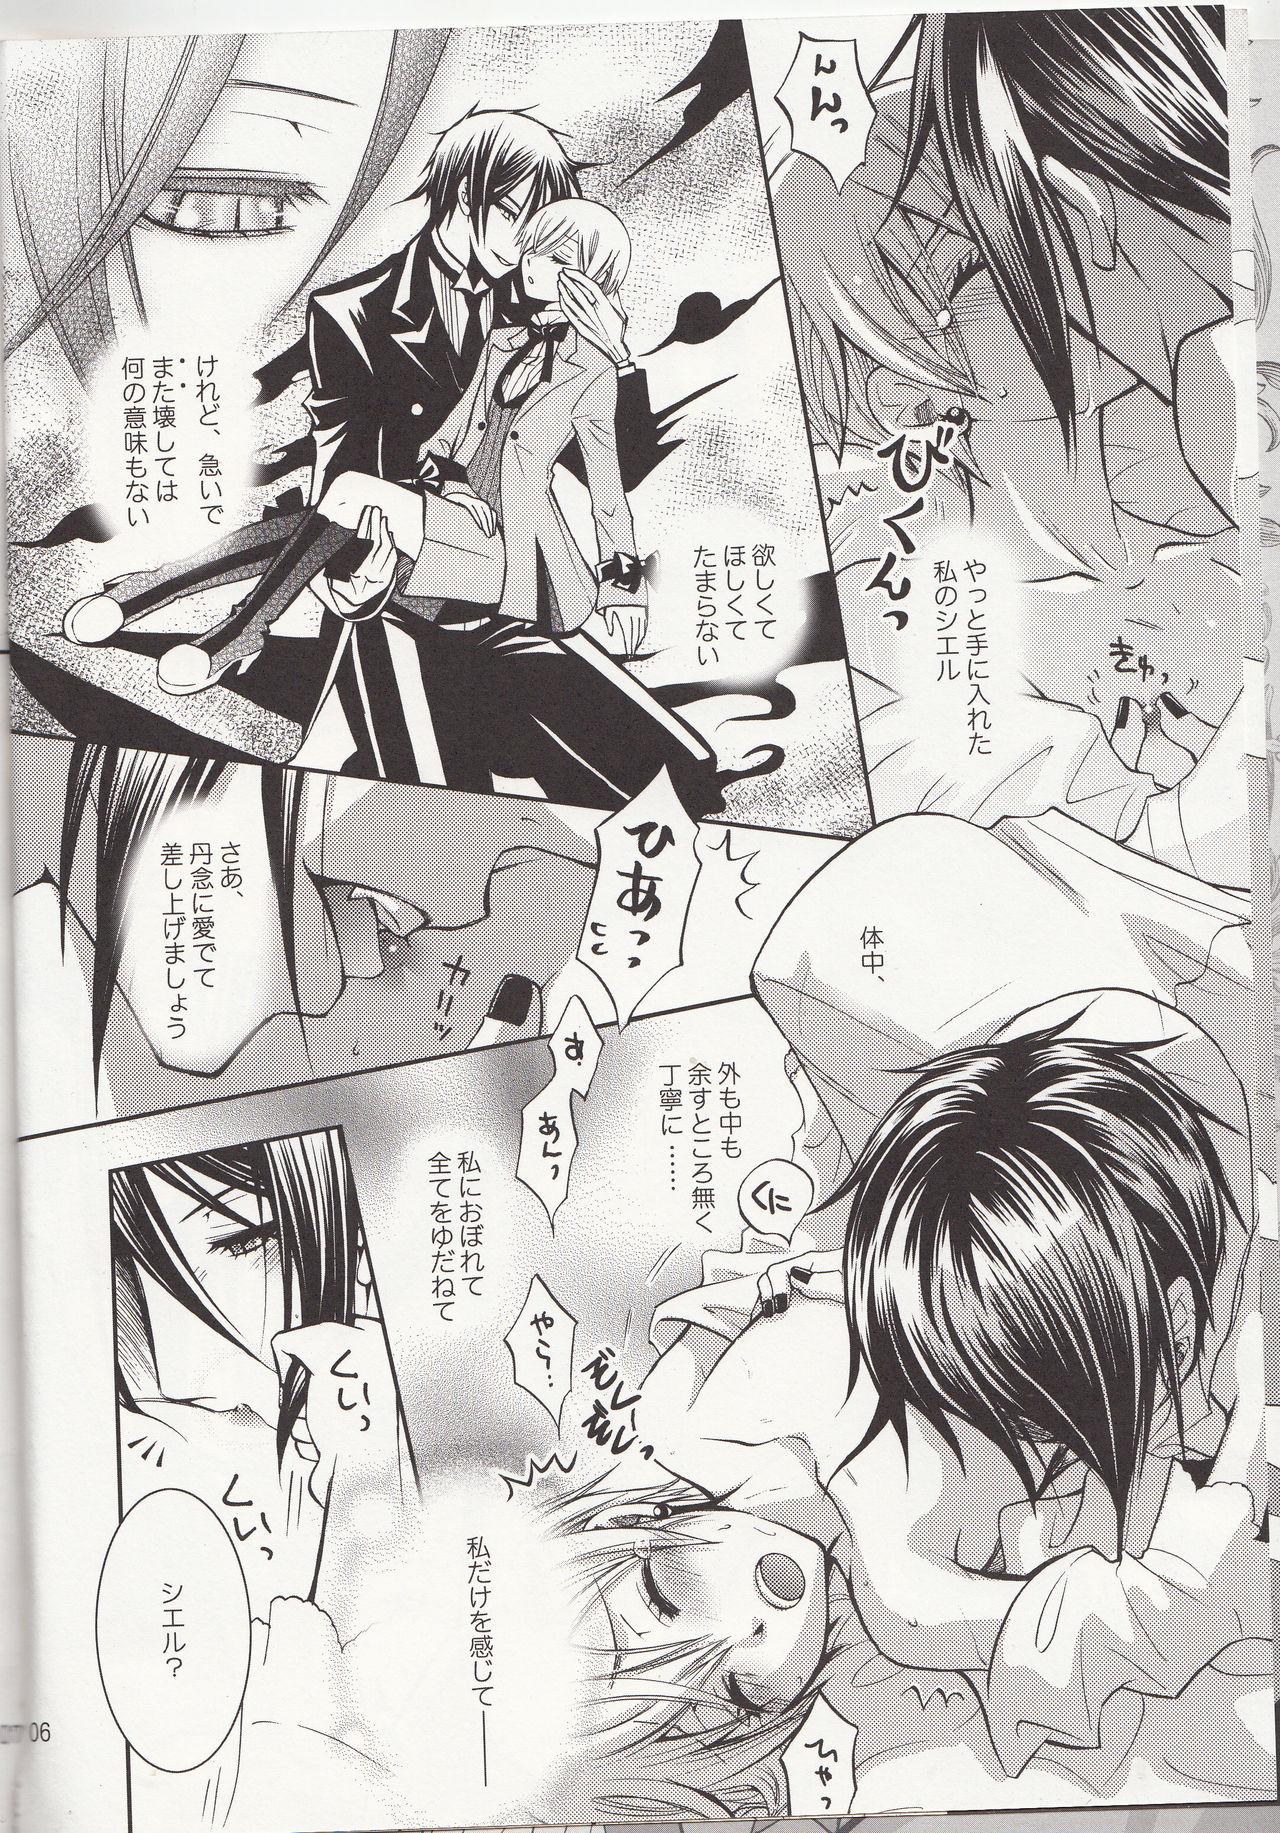 Hardcore Gay and so... - Black butler Dominate - Page 7